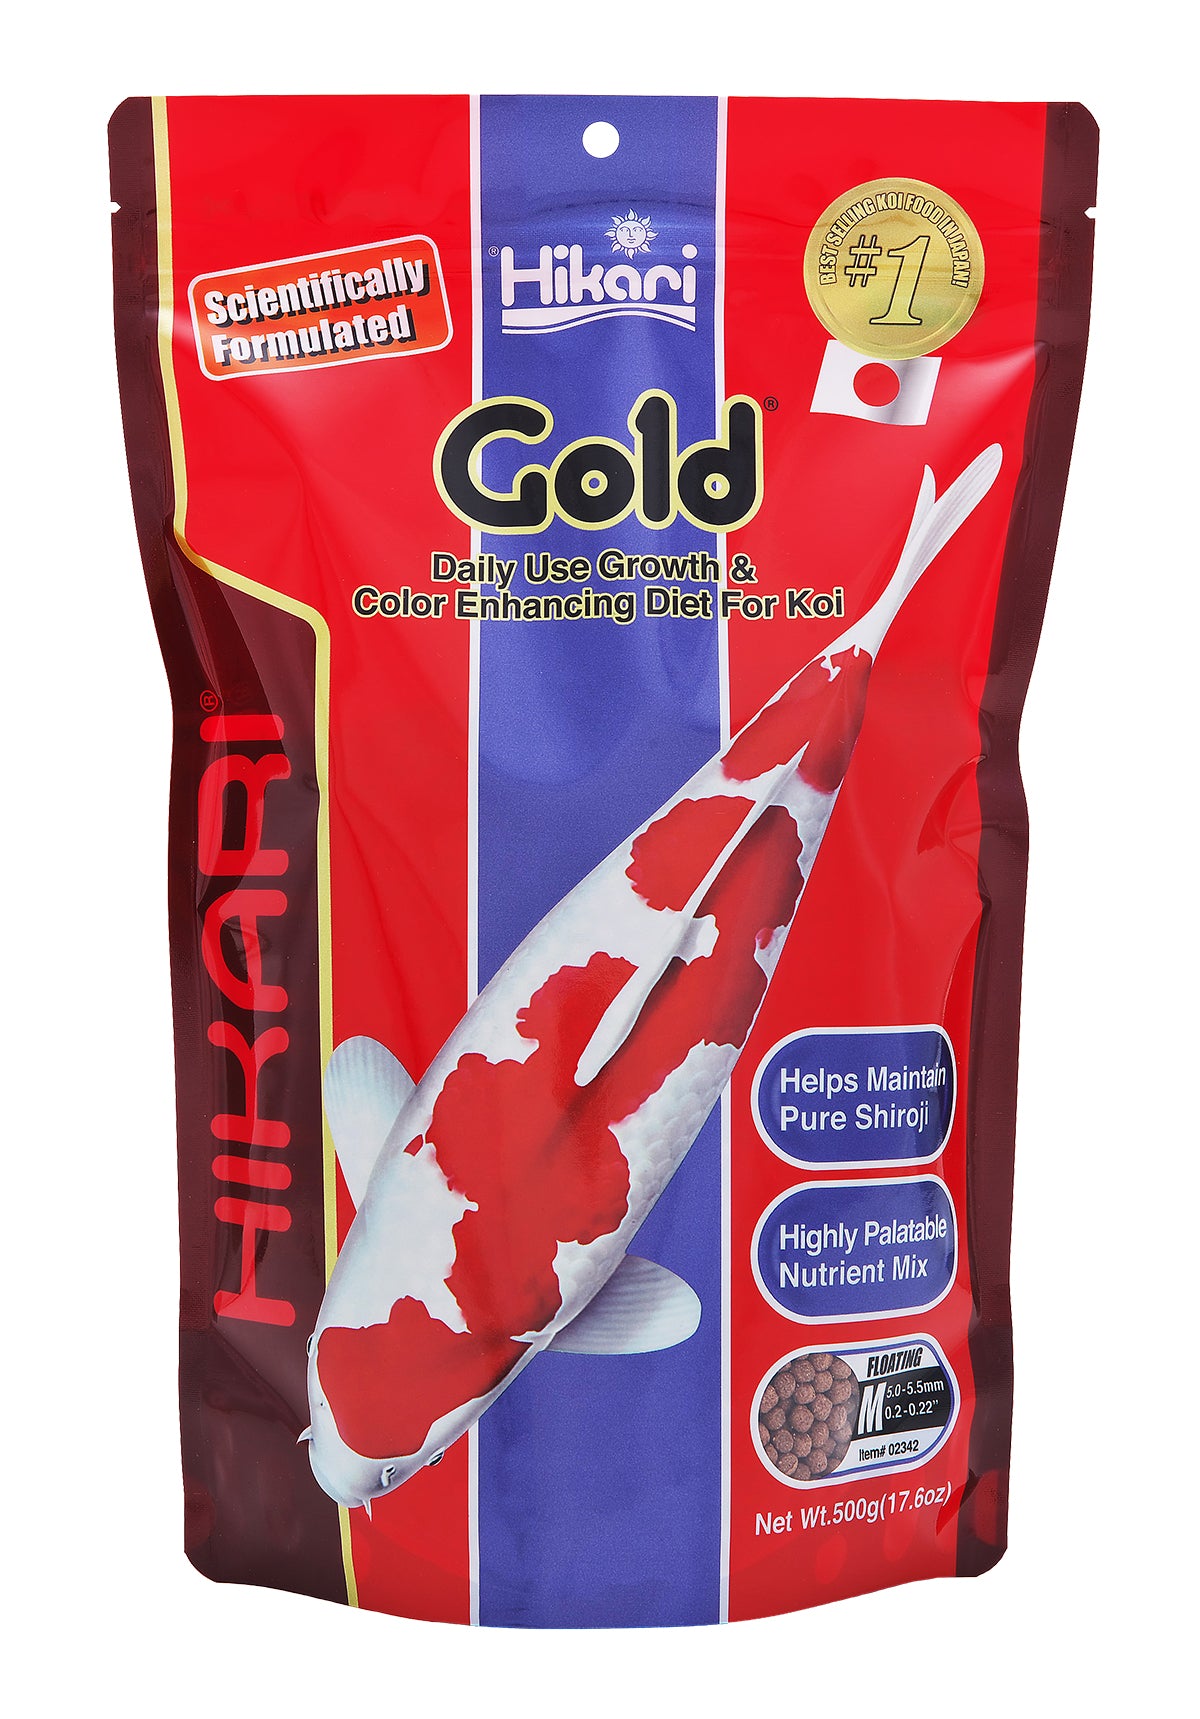 Hikari Gold Daily Use Growth & Color Enhancing Diet For Koi